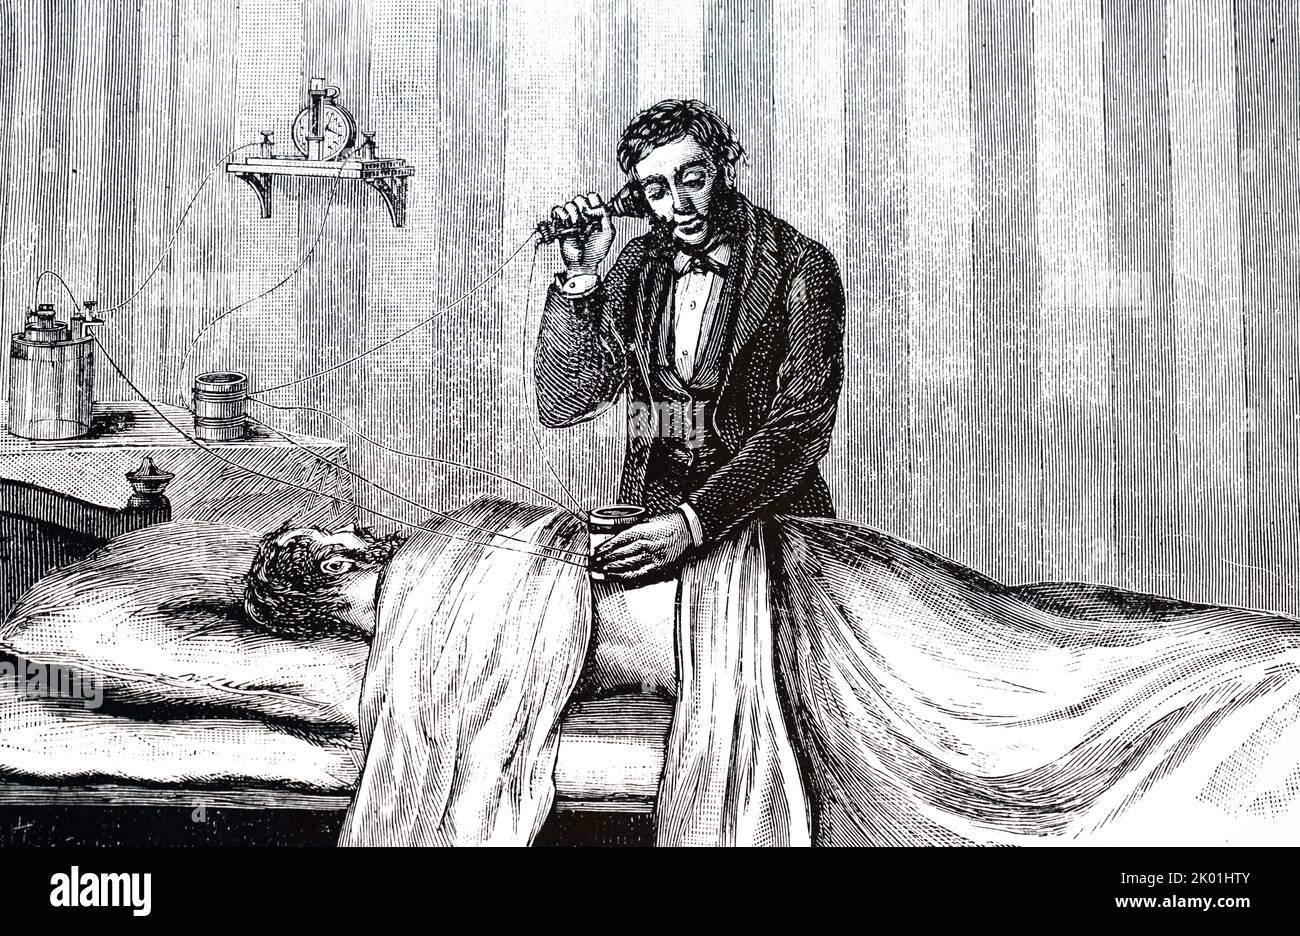 Surgeon searching for a bullet using an induction balance and earpiece containing a Hughes microphone. Apparatus contrived by David Edward Hughes (1830-1900). From The World of Wonders, Cassel & Co, London, 1896. Stock Photo